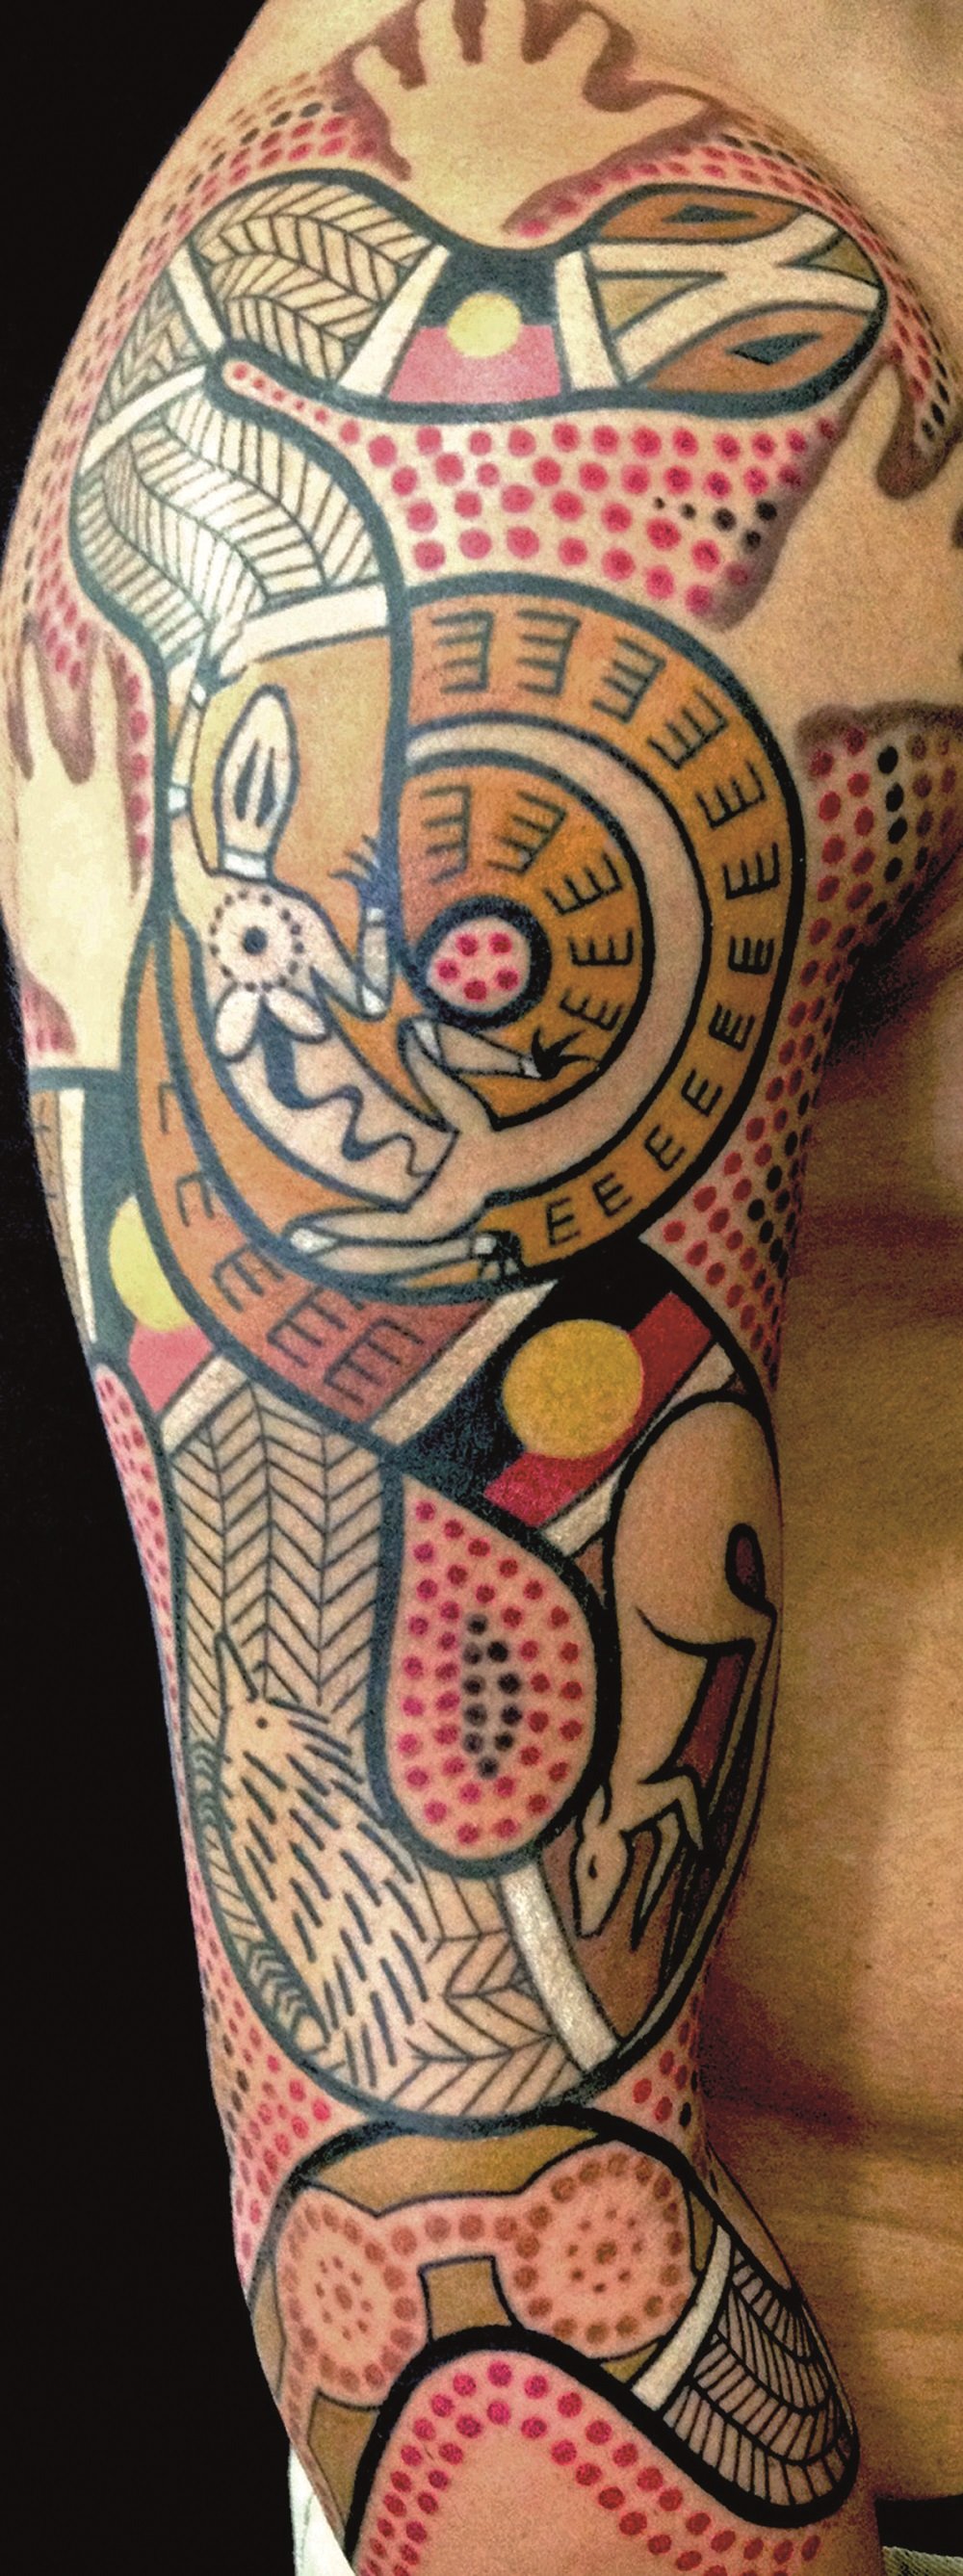 Reviving the cultural tradition of tattooing Indigenous communities |  Special Issue – The Link